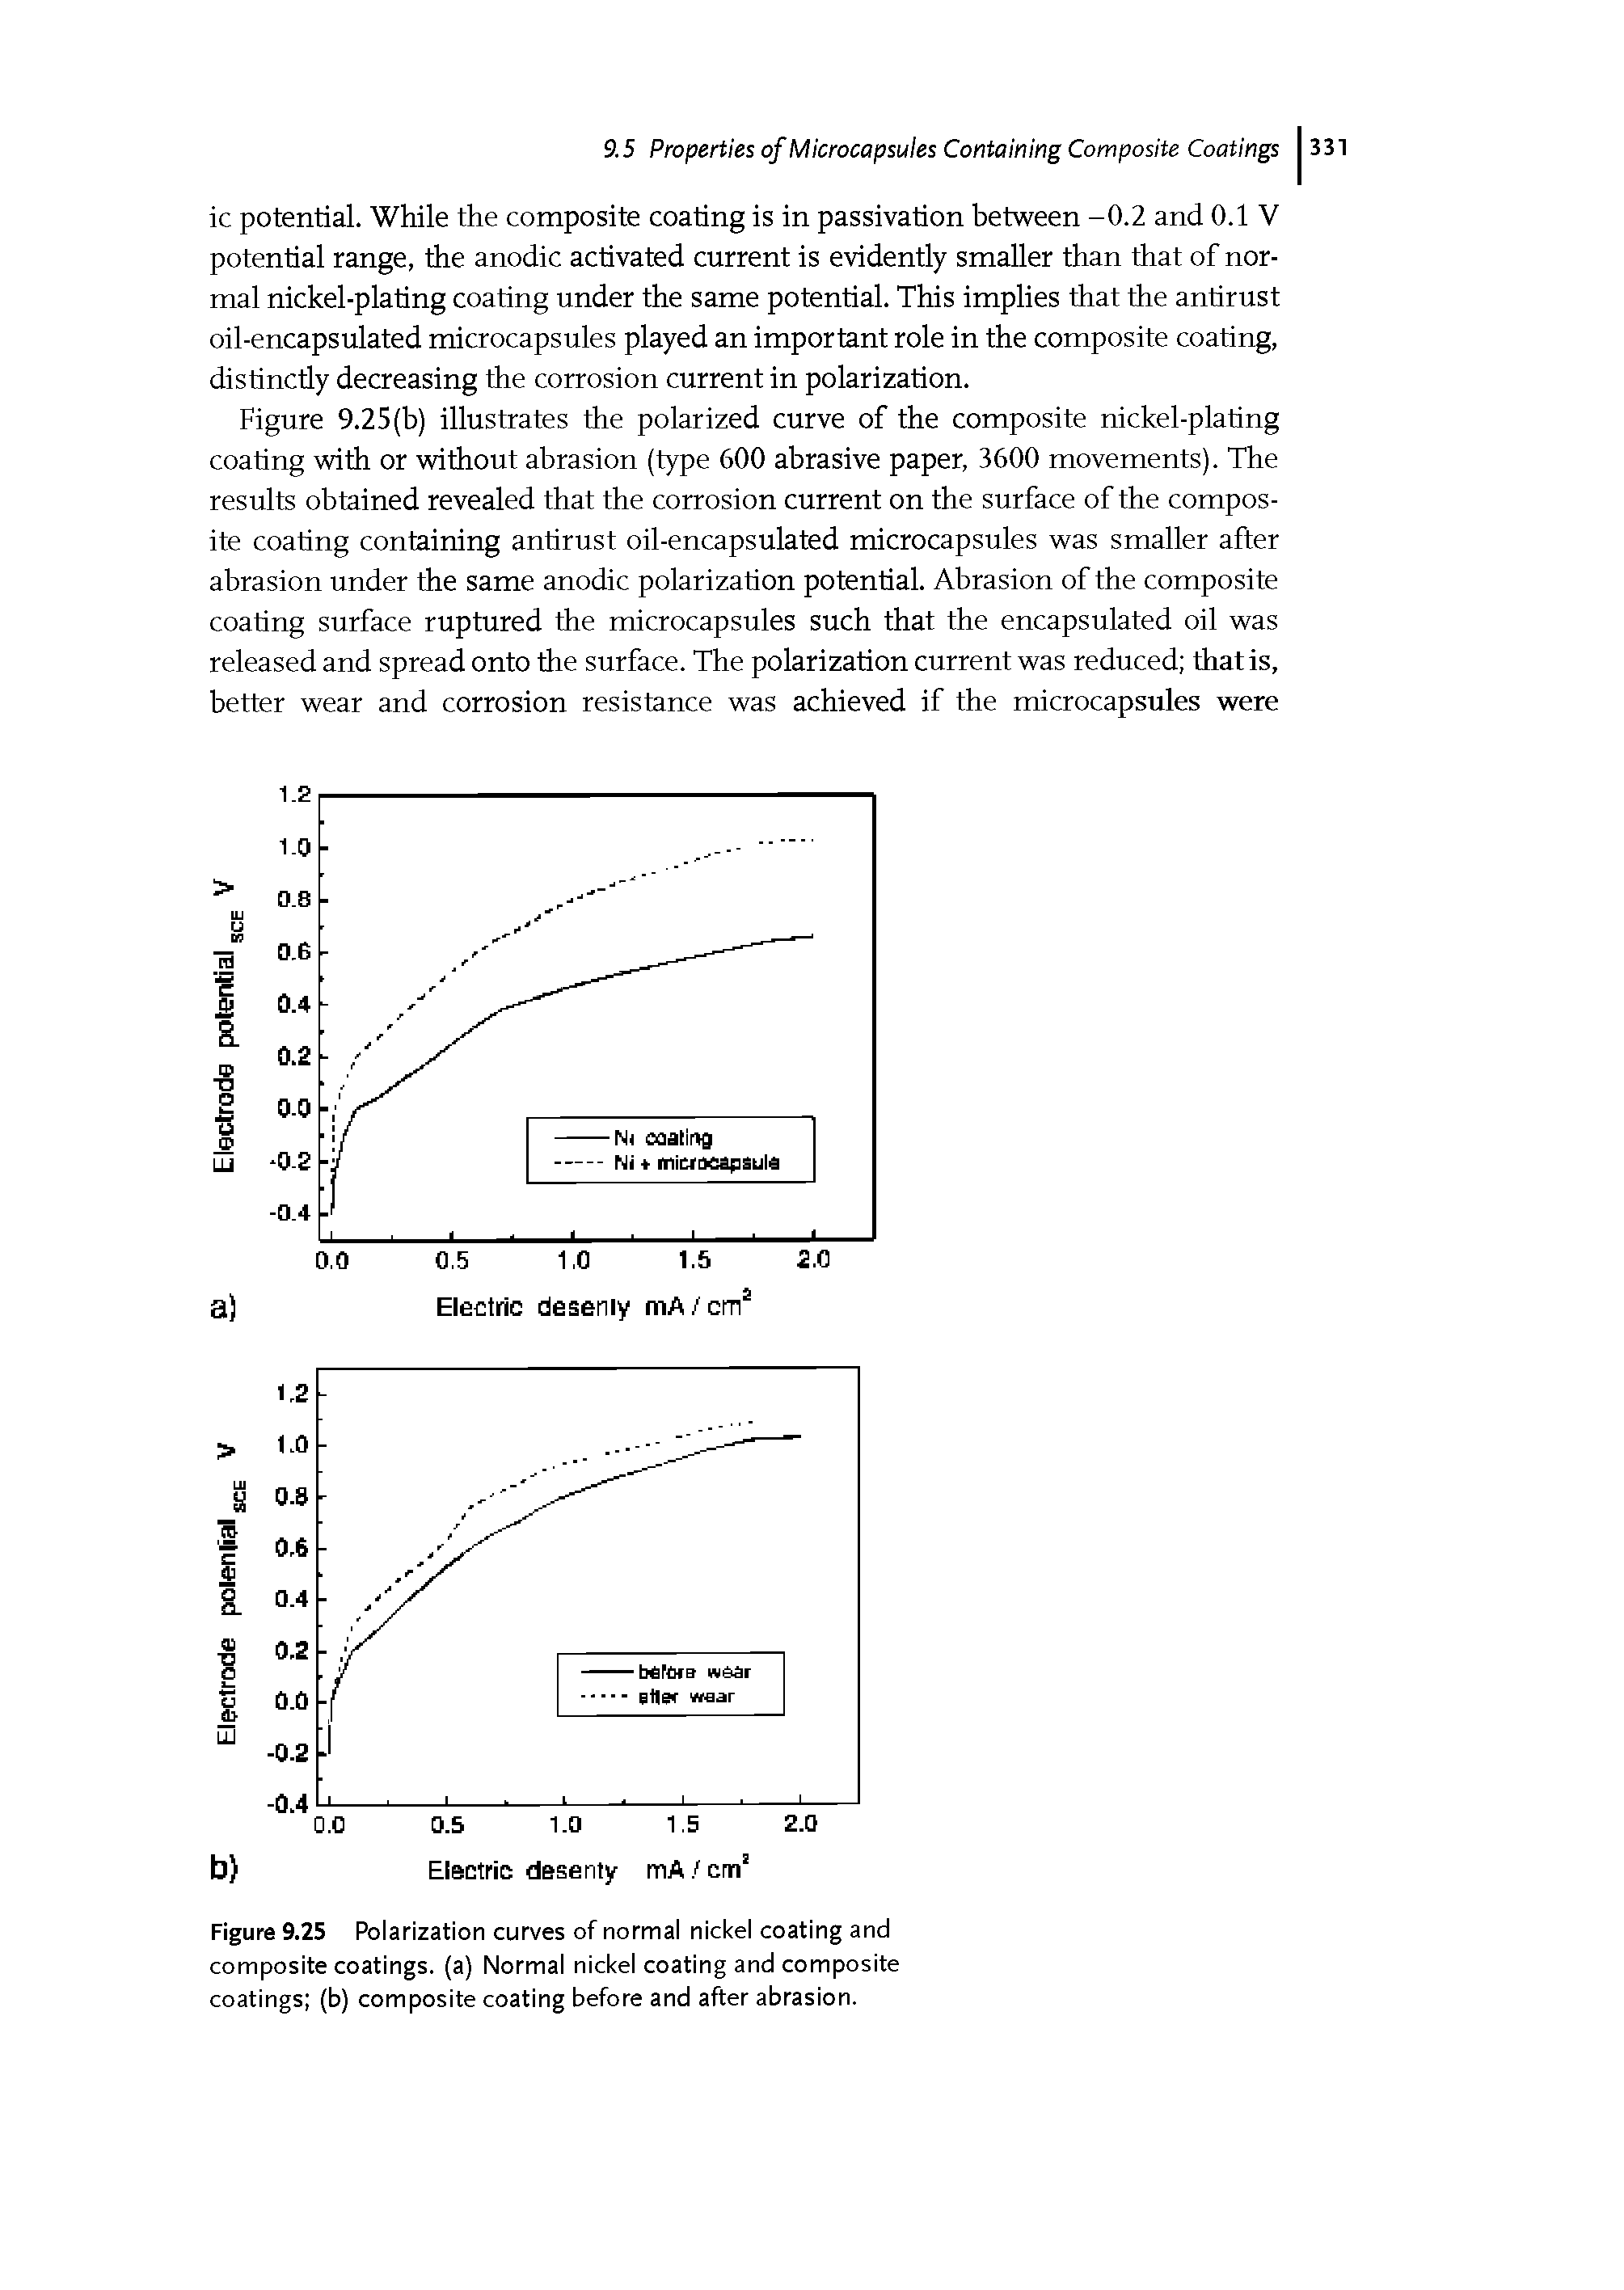 Figure 9.25 Polarization curves of normal nickel coating and composite coatings, (a) Normal nickel coating and composite coatings (b) composite coating before and after abrasion.